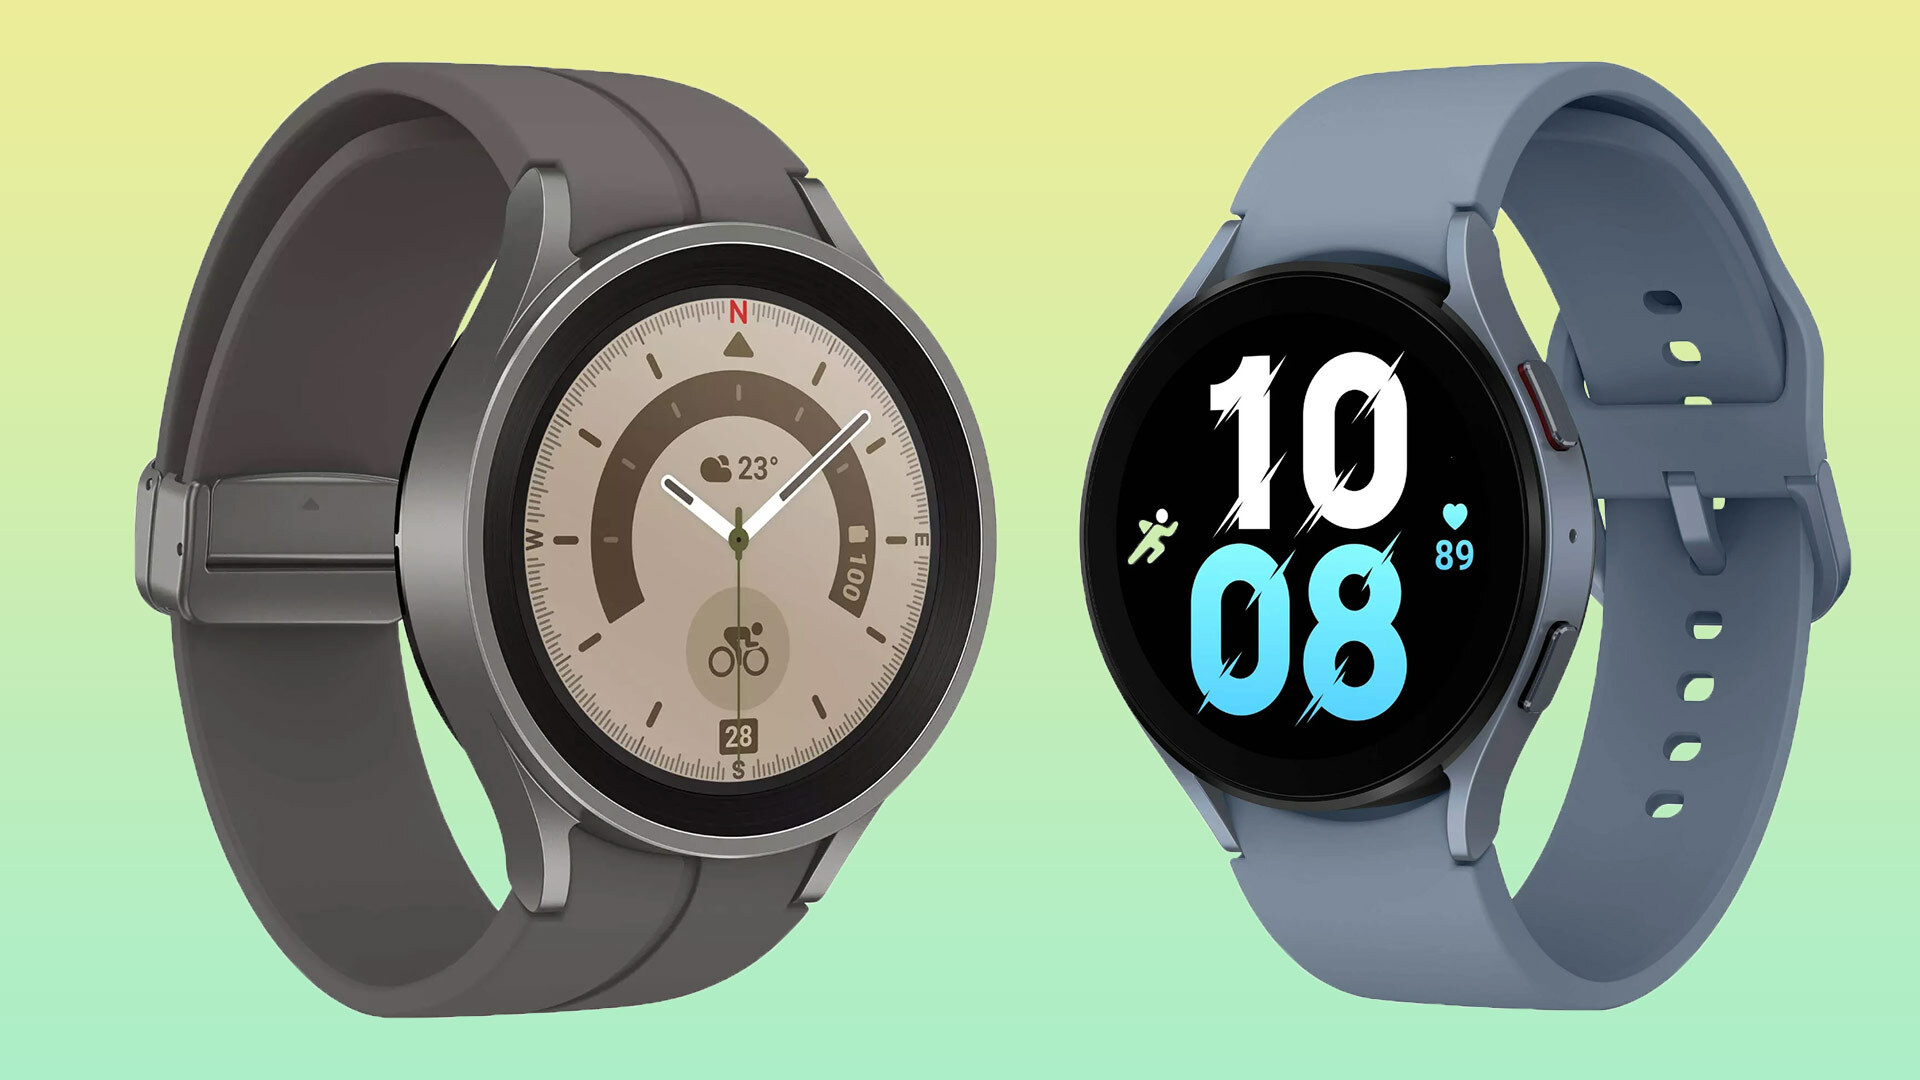 Galaxy Watch 5 Pro (left) and Galaxy Watch 5 (right)